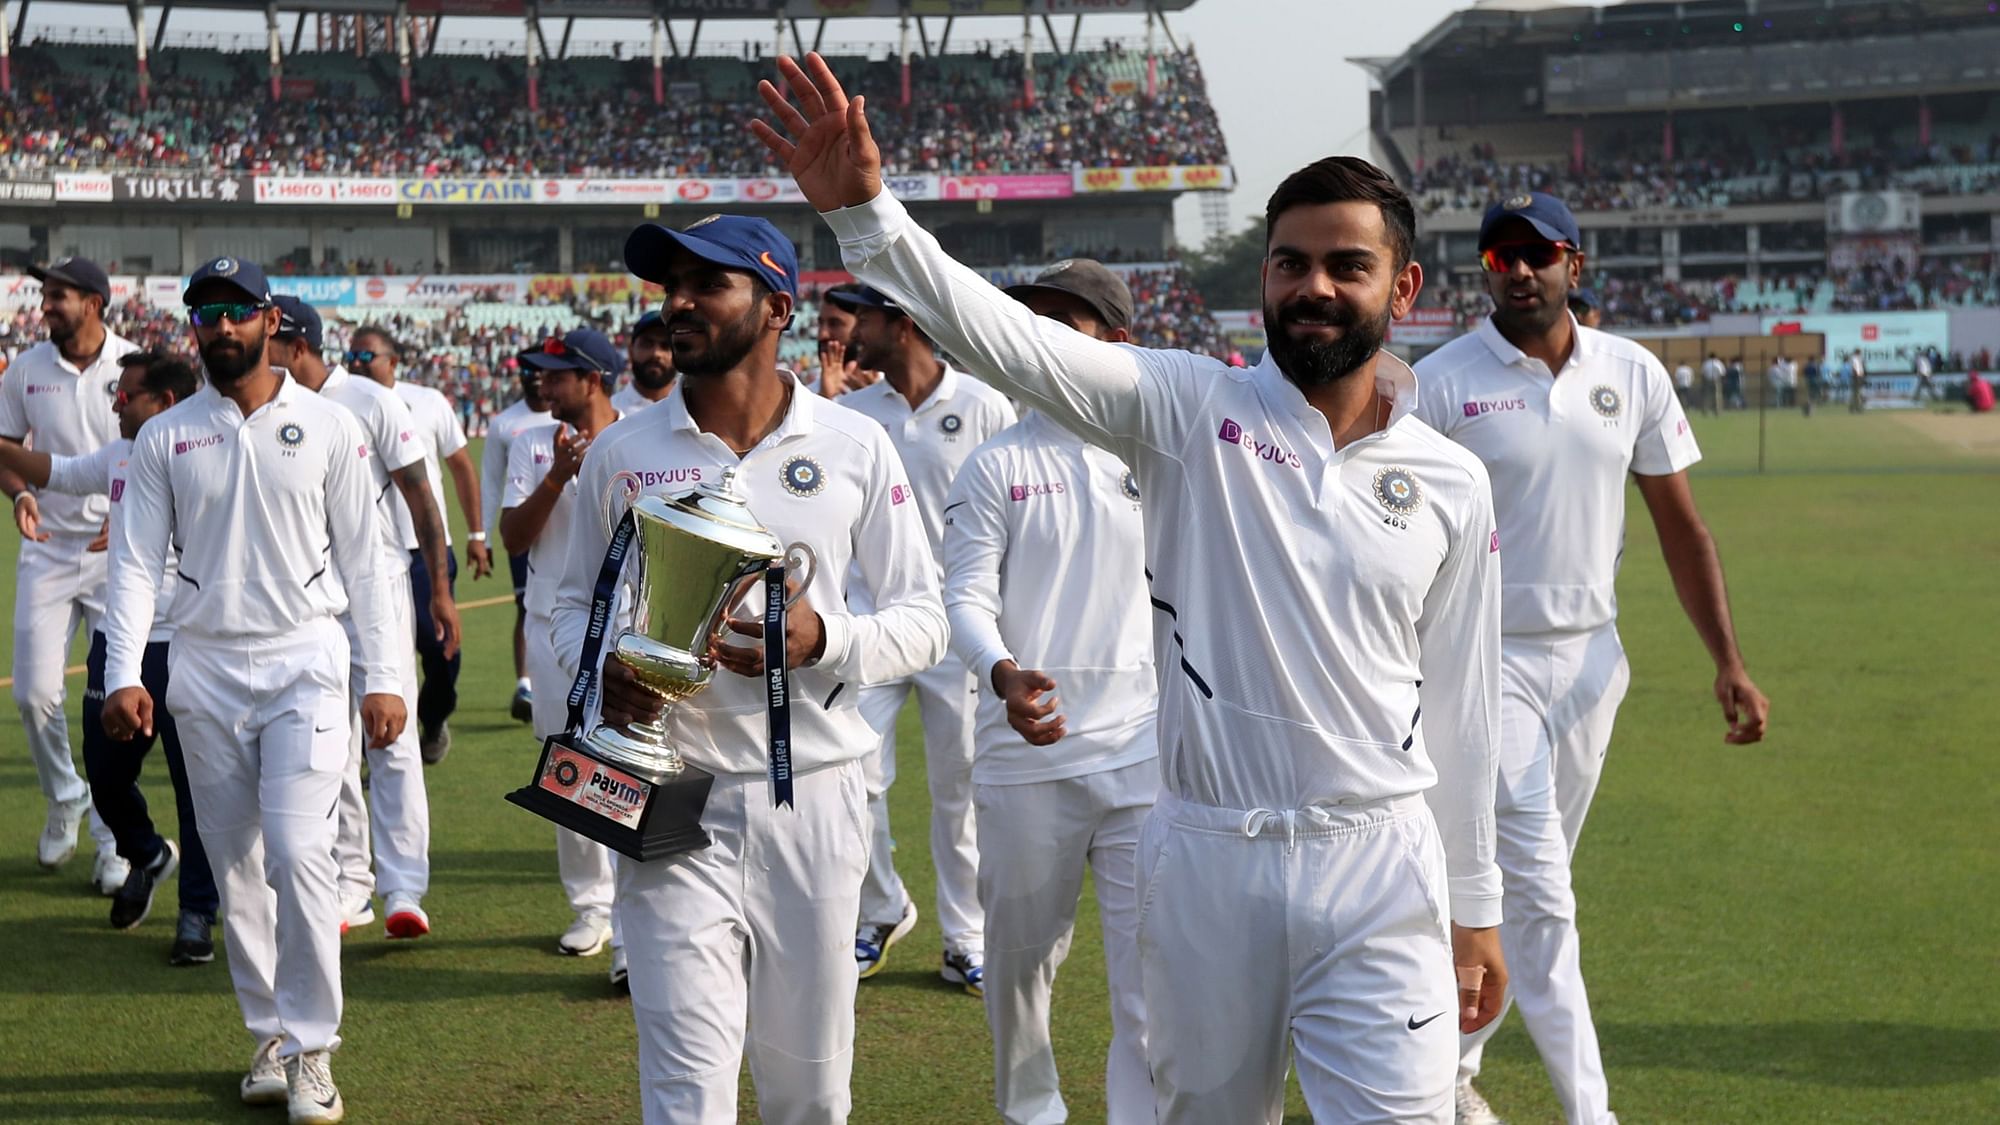 All the records broken by both India and Bangladesh in the Eden Gardens’ Day-Night Test.